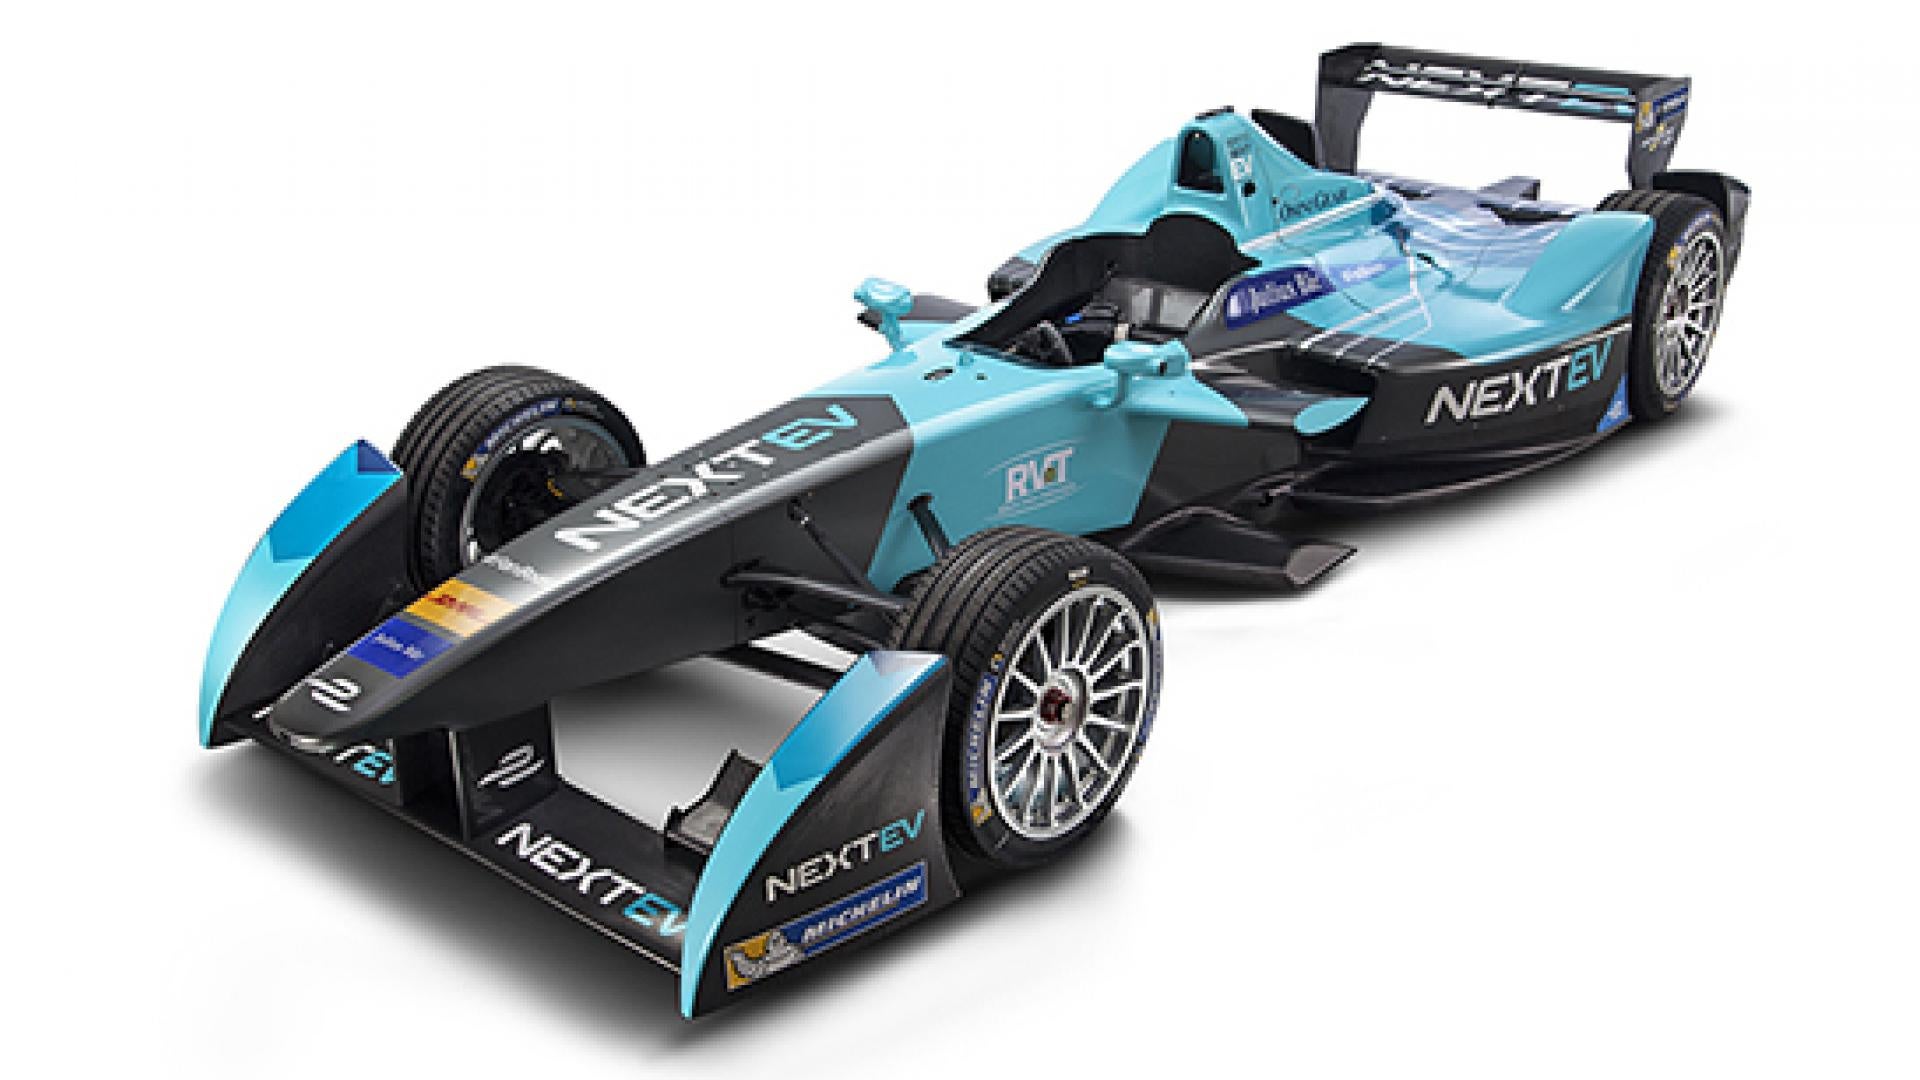 NEXTEV TCR reveal new livery and drivers for the 2015-16 season